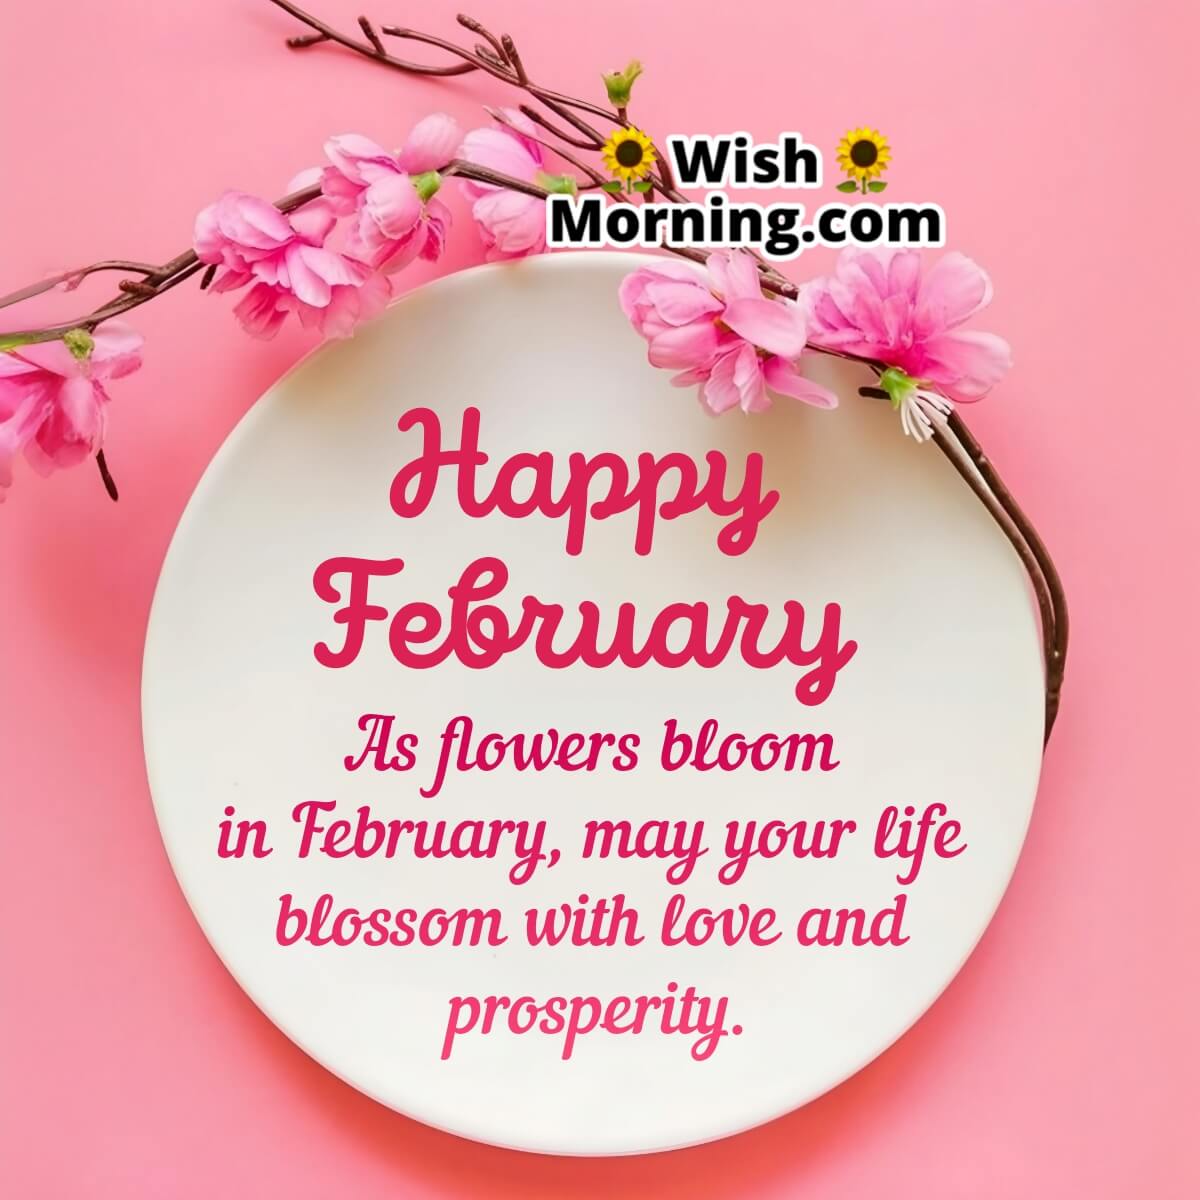 Happy February Month Greetings